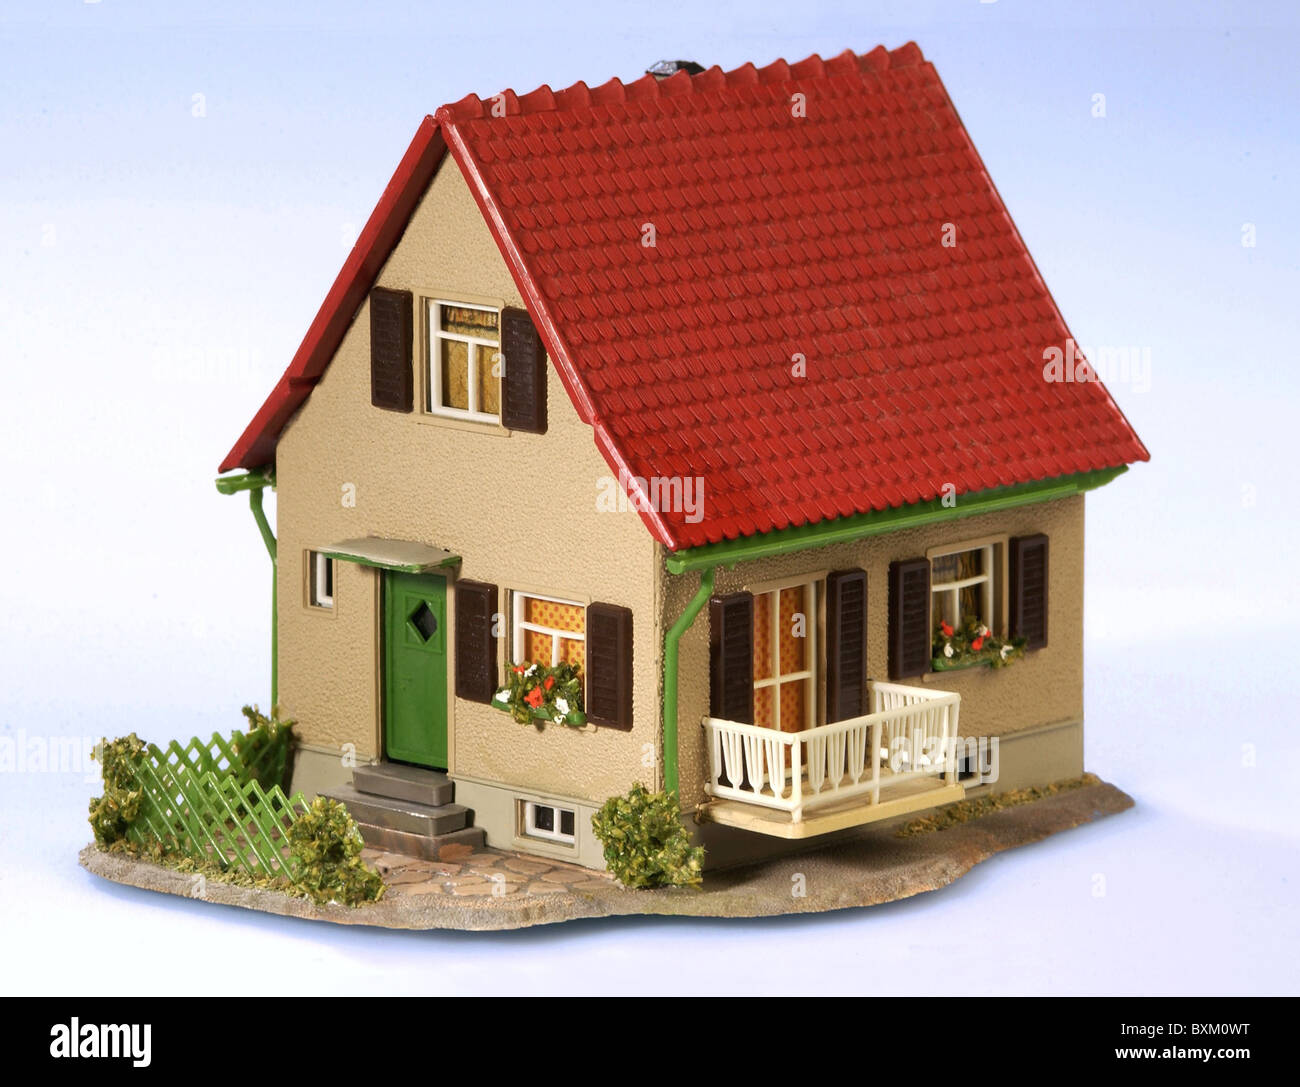 building industry, miniature of a detached house, Germany, 1950s, home, building society savings, homebuyer allowance, immovable, immovables, balcony, red, roof, 50s, 20th century, historic, historical, clipping, cut out, cut-out, cut-outs, Additional-Rights-Clearences-Not Available Stock Photo